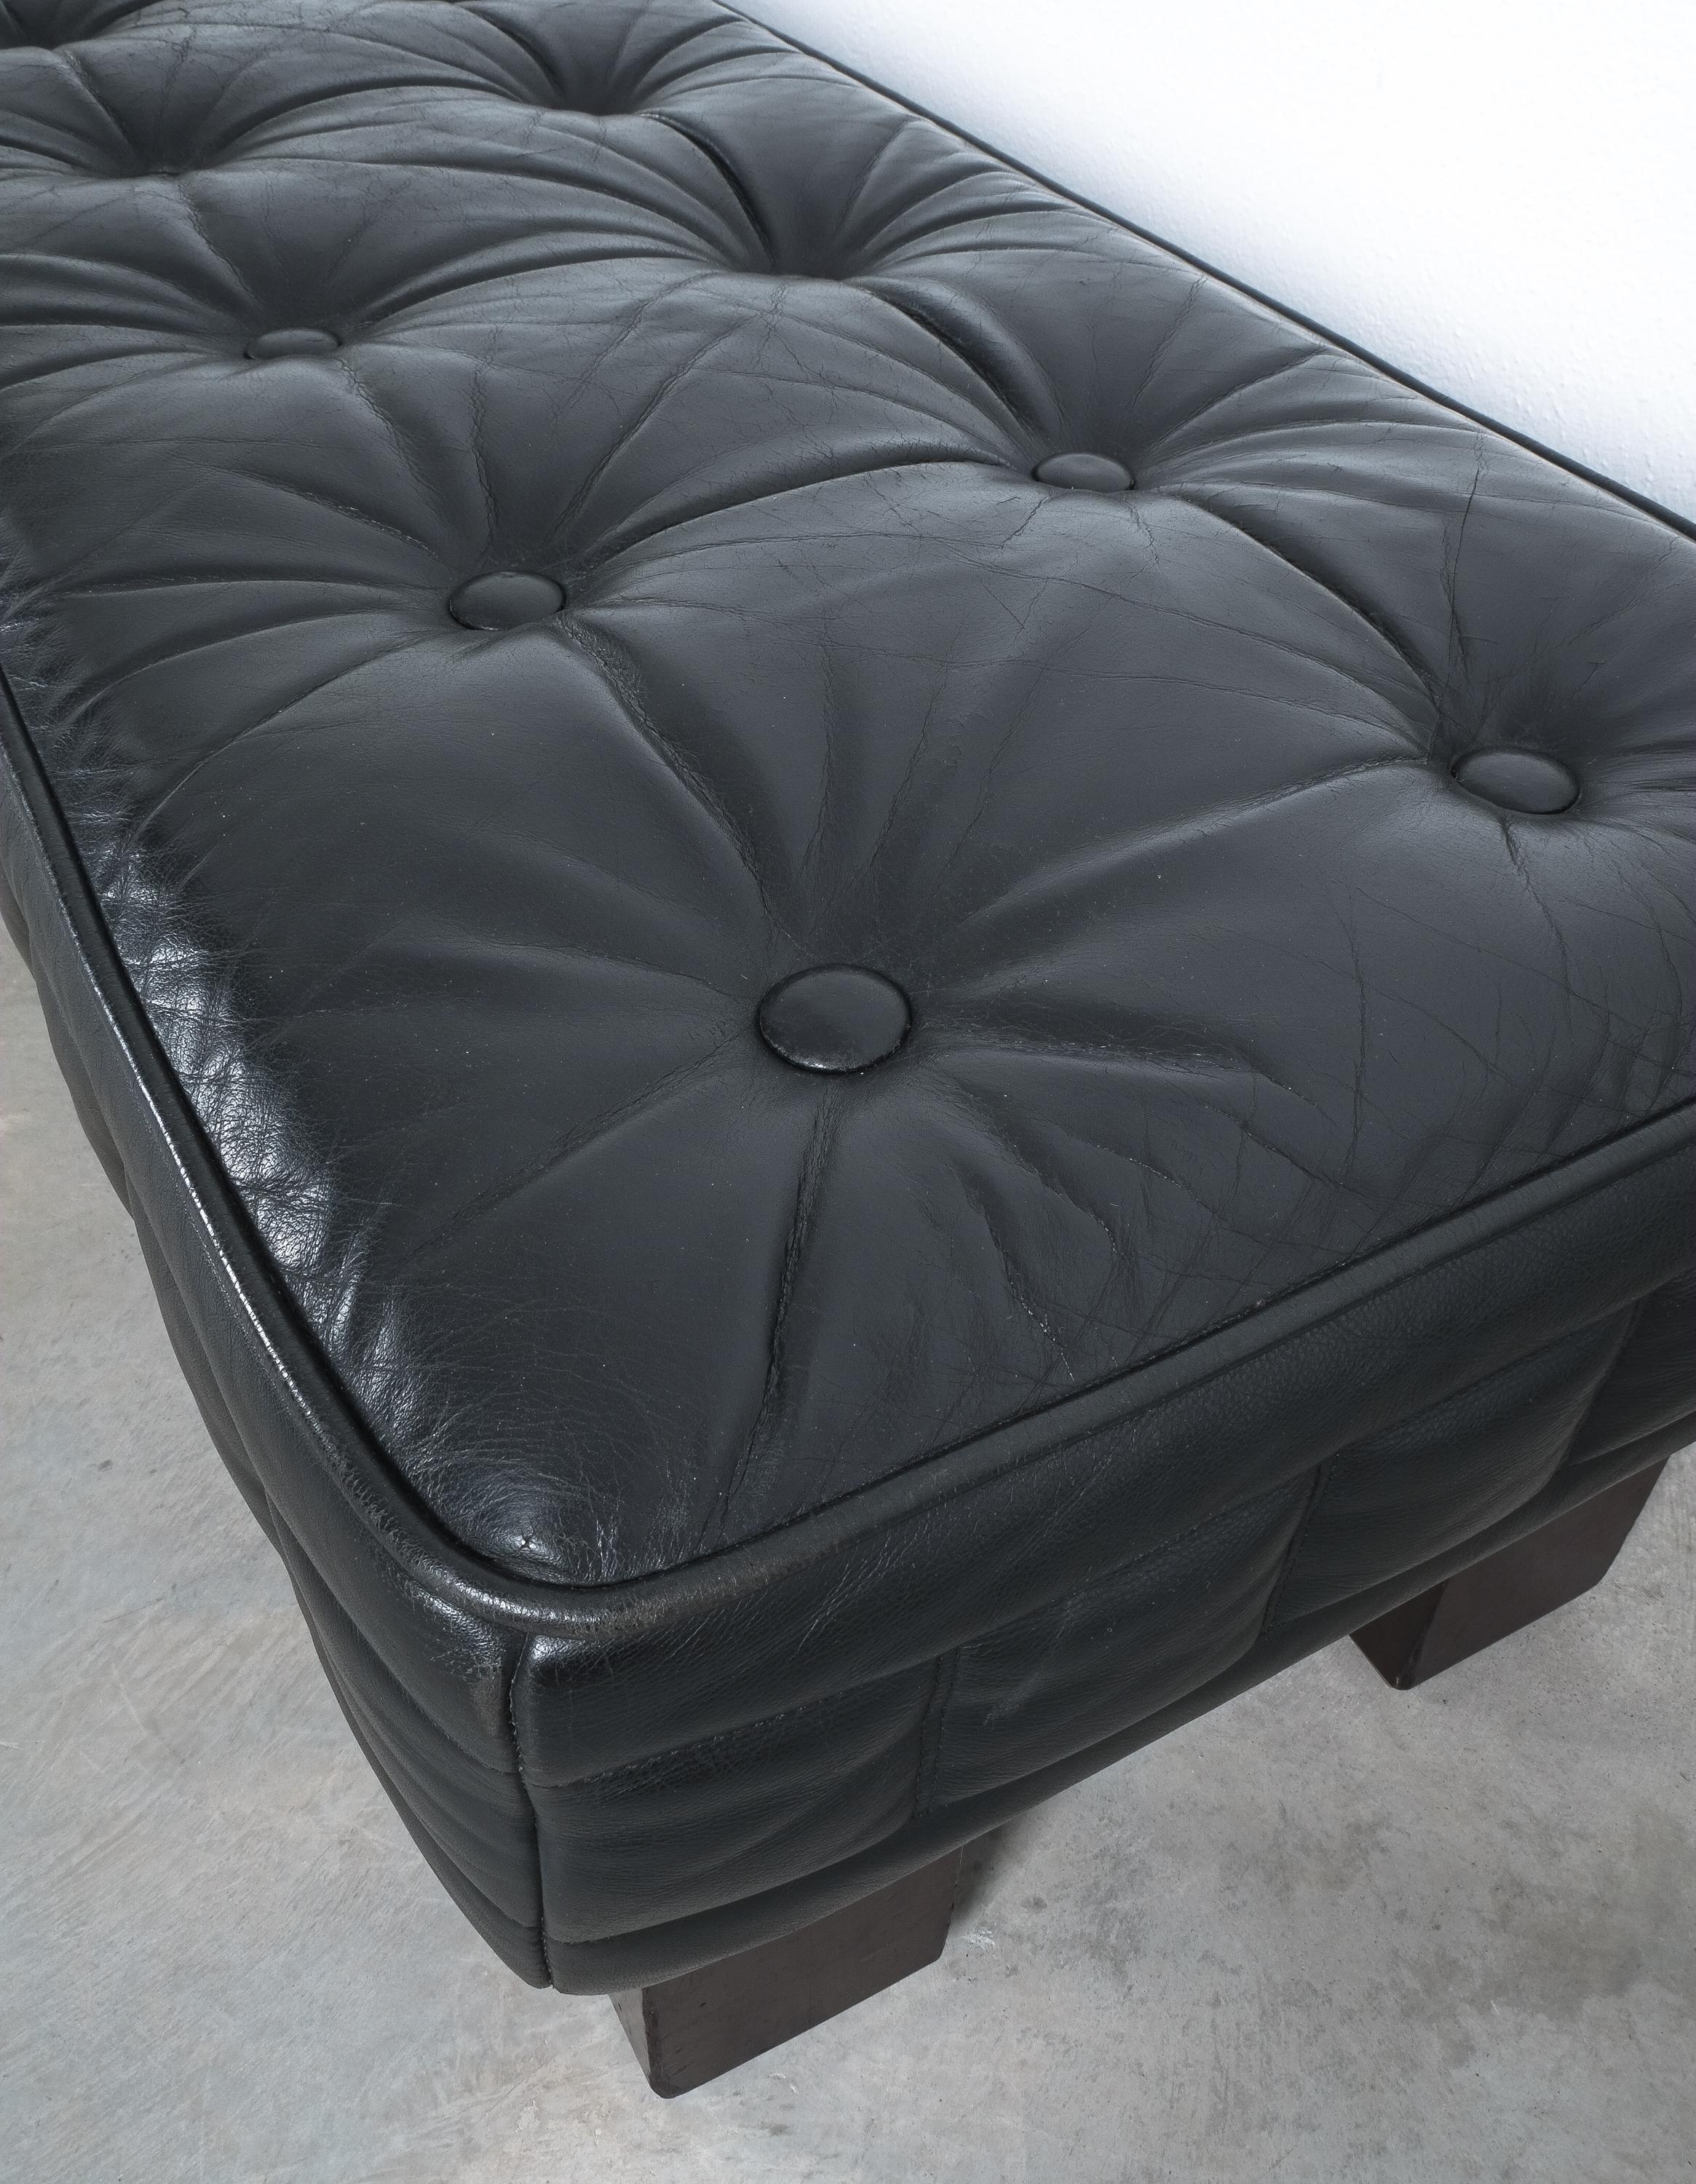 Late 20th Century Matteo Thun Tufted Black Leather Banquettes (2 pieces) Bench Materassi, Wittmann For Sale